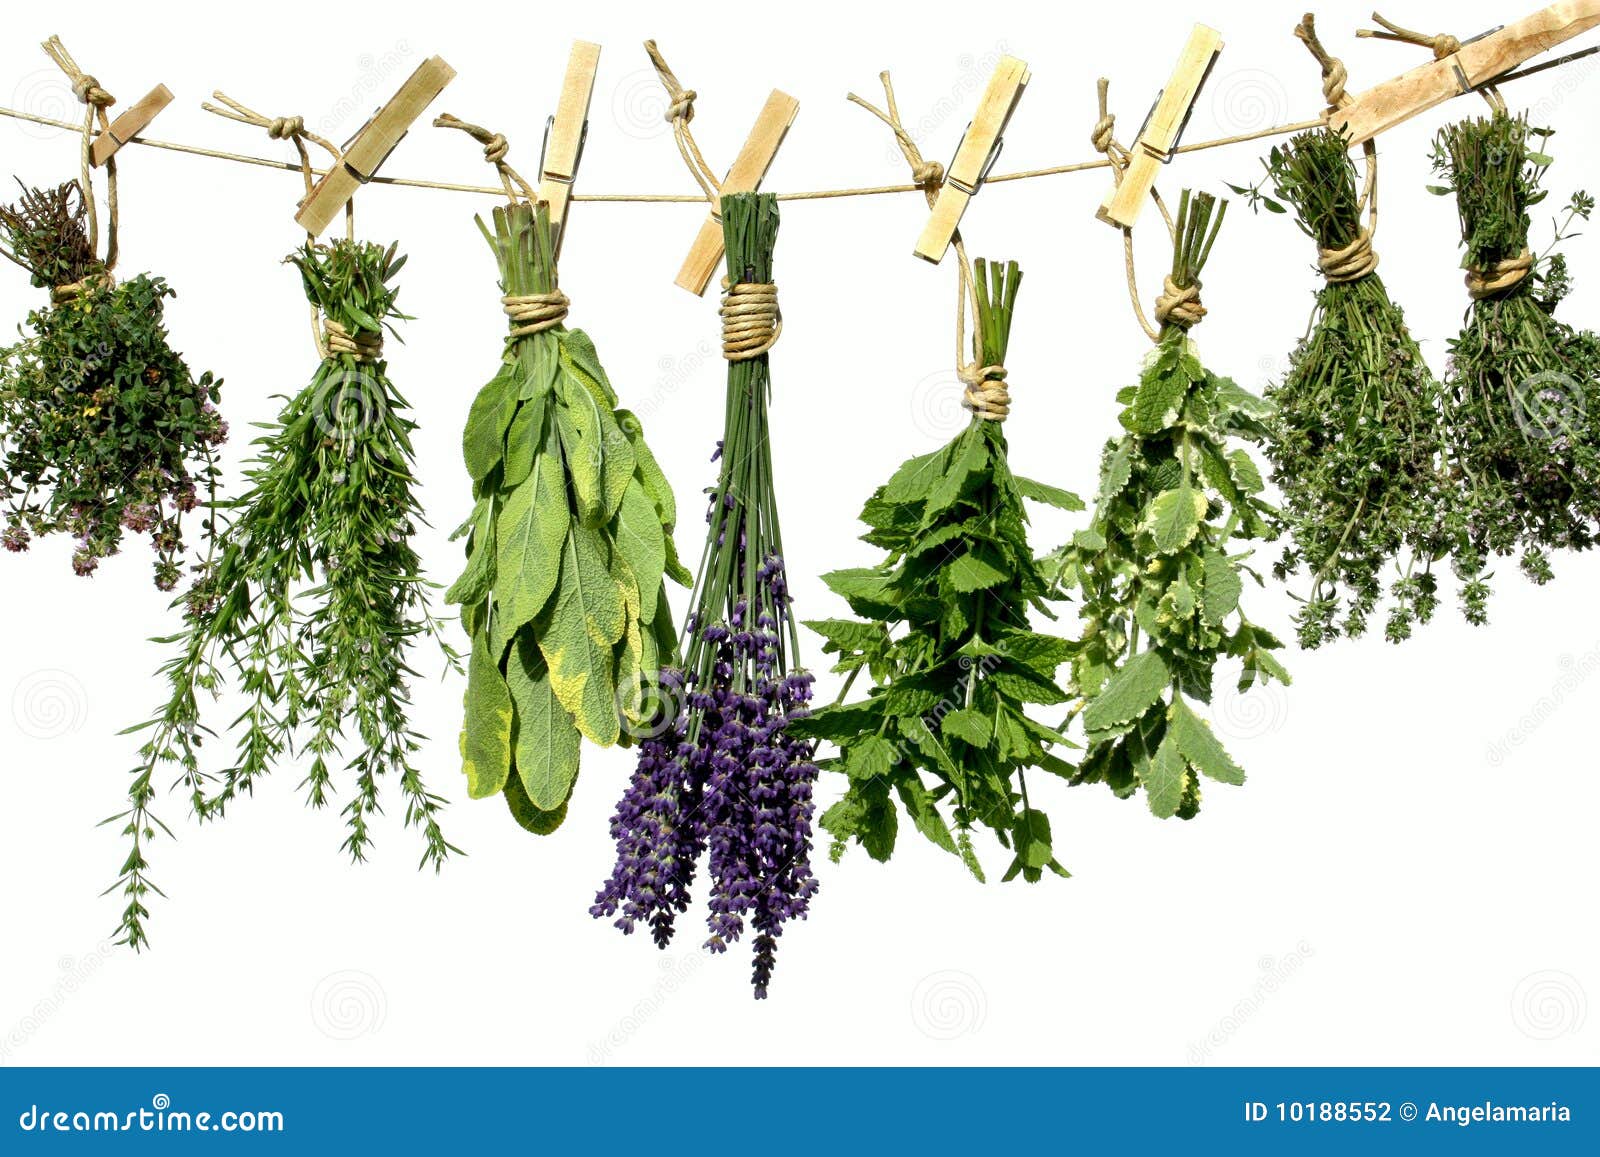 herbs on clothes line